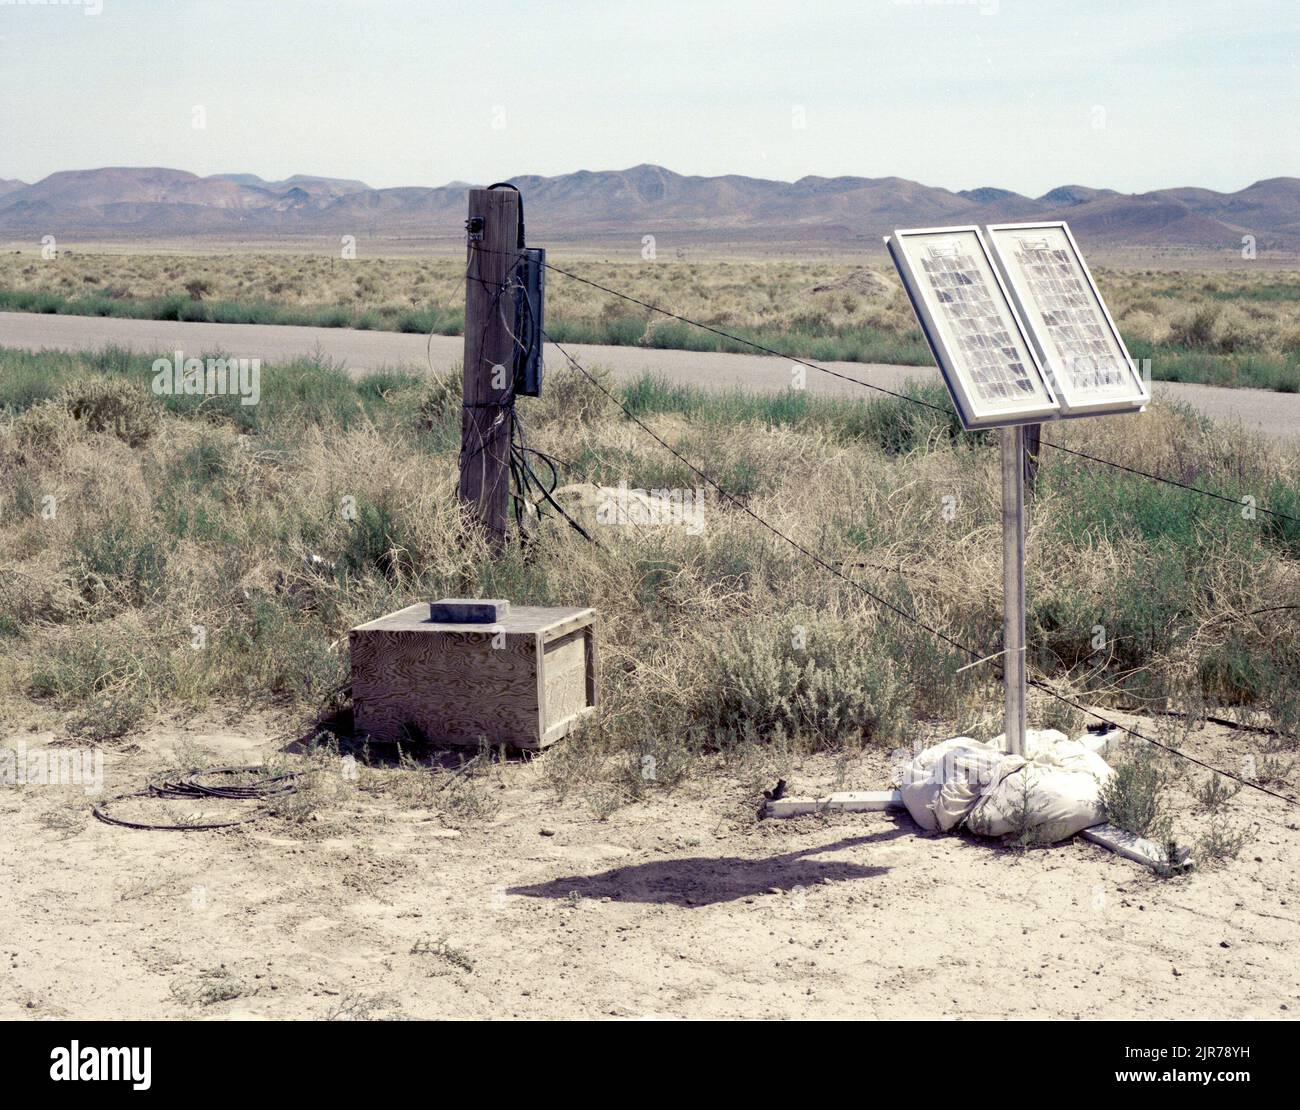 A851026 SEISMIC STATIONS AREA 3 LEO BRADY (Project Engineer) JUN 28 85 EG&G/NTS PHOTO LAB Publication Date: 6/28/1985  AREA 3; EDGERTON, GERMESHAUSEN & GRIER; EG&G; MOUNTAINS; NELSON'S LANDING; NEVADA; NEVADA TEST SITE; NTS; NUCLEAR ENERGY TECHNOLOGY; SEISMIC; SEISMIC STATIONS; TEST SITES; TUNNELS; TUNNELS BY USAGE; UGT; UNDERGROUND; UNDERGROUND TESTING  historical images. 1972 - 2012. Department of Energy. National Nuclear Security Administration. Photographs Related to Nuclear Weapons Testing at the Nevada Test Site. Stock Photo